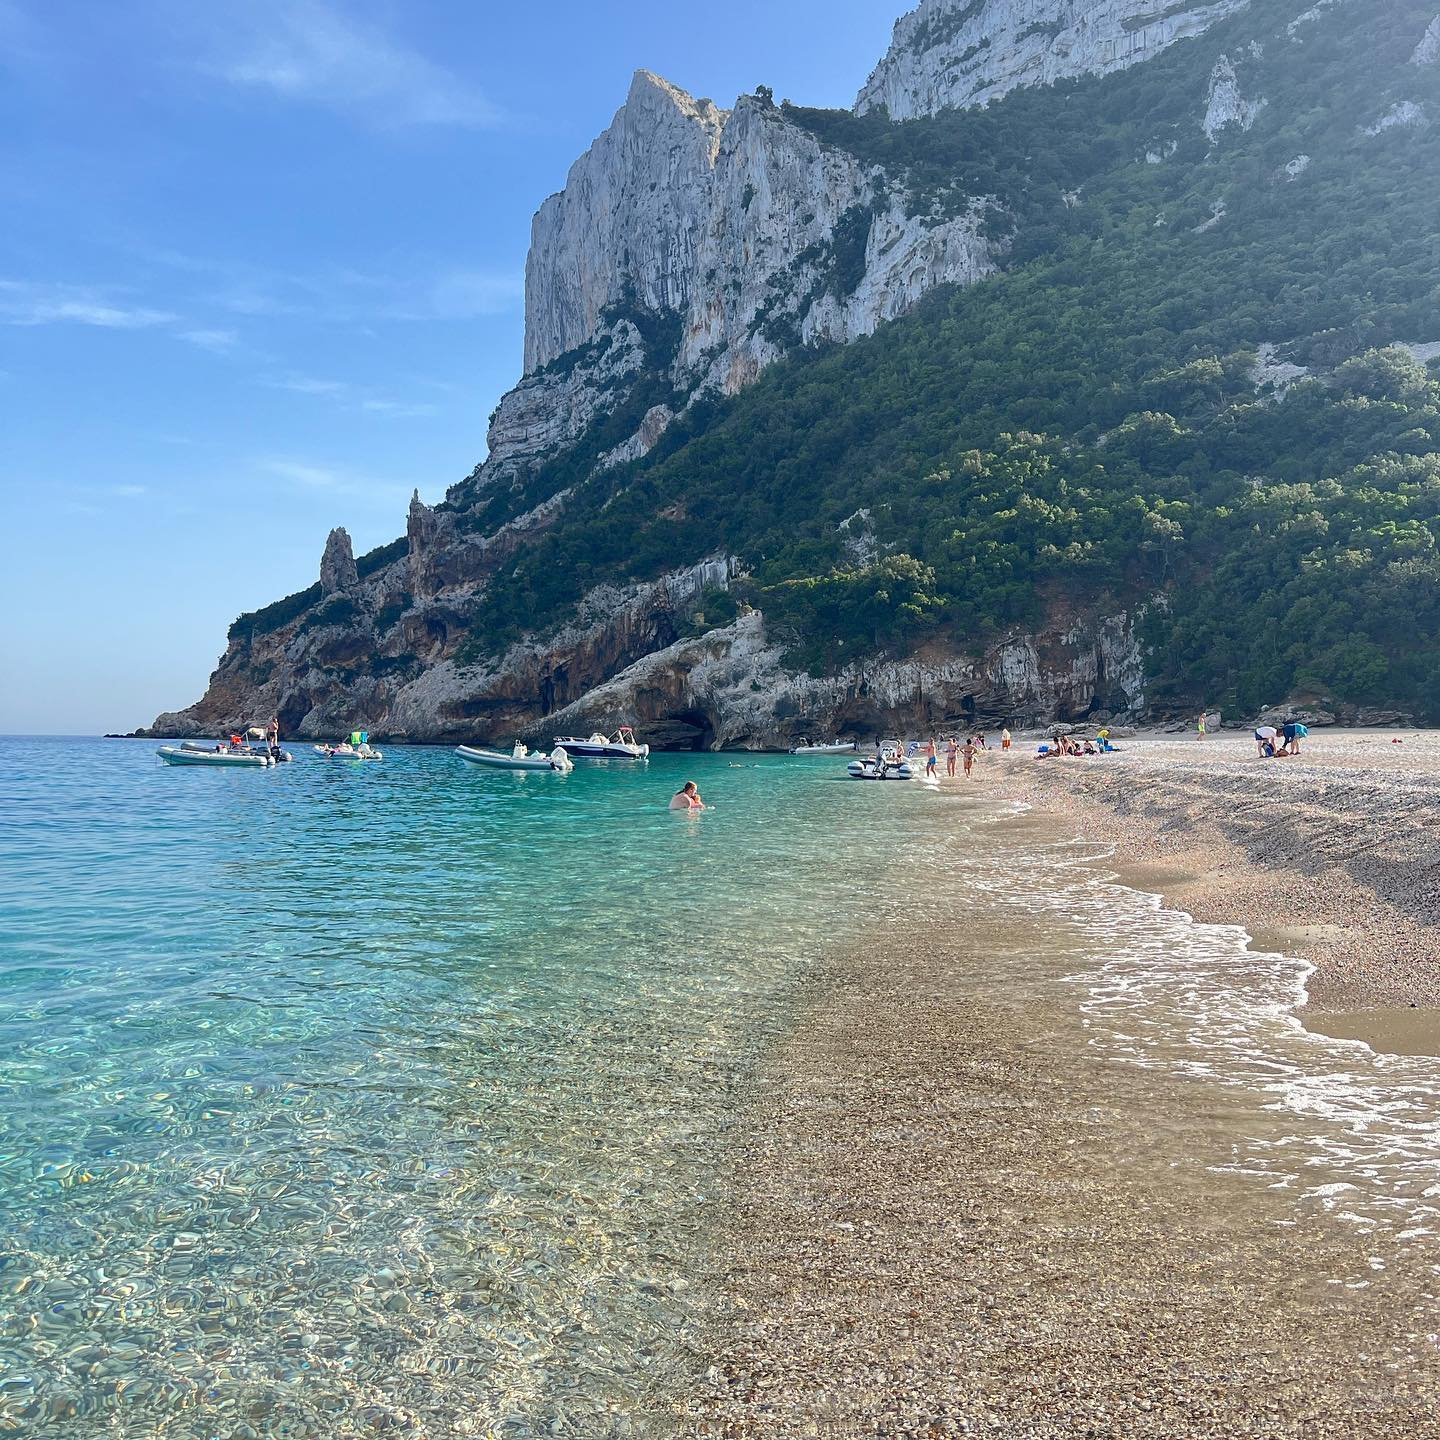 A secluded beach and cliffs in Sardinia